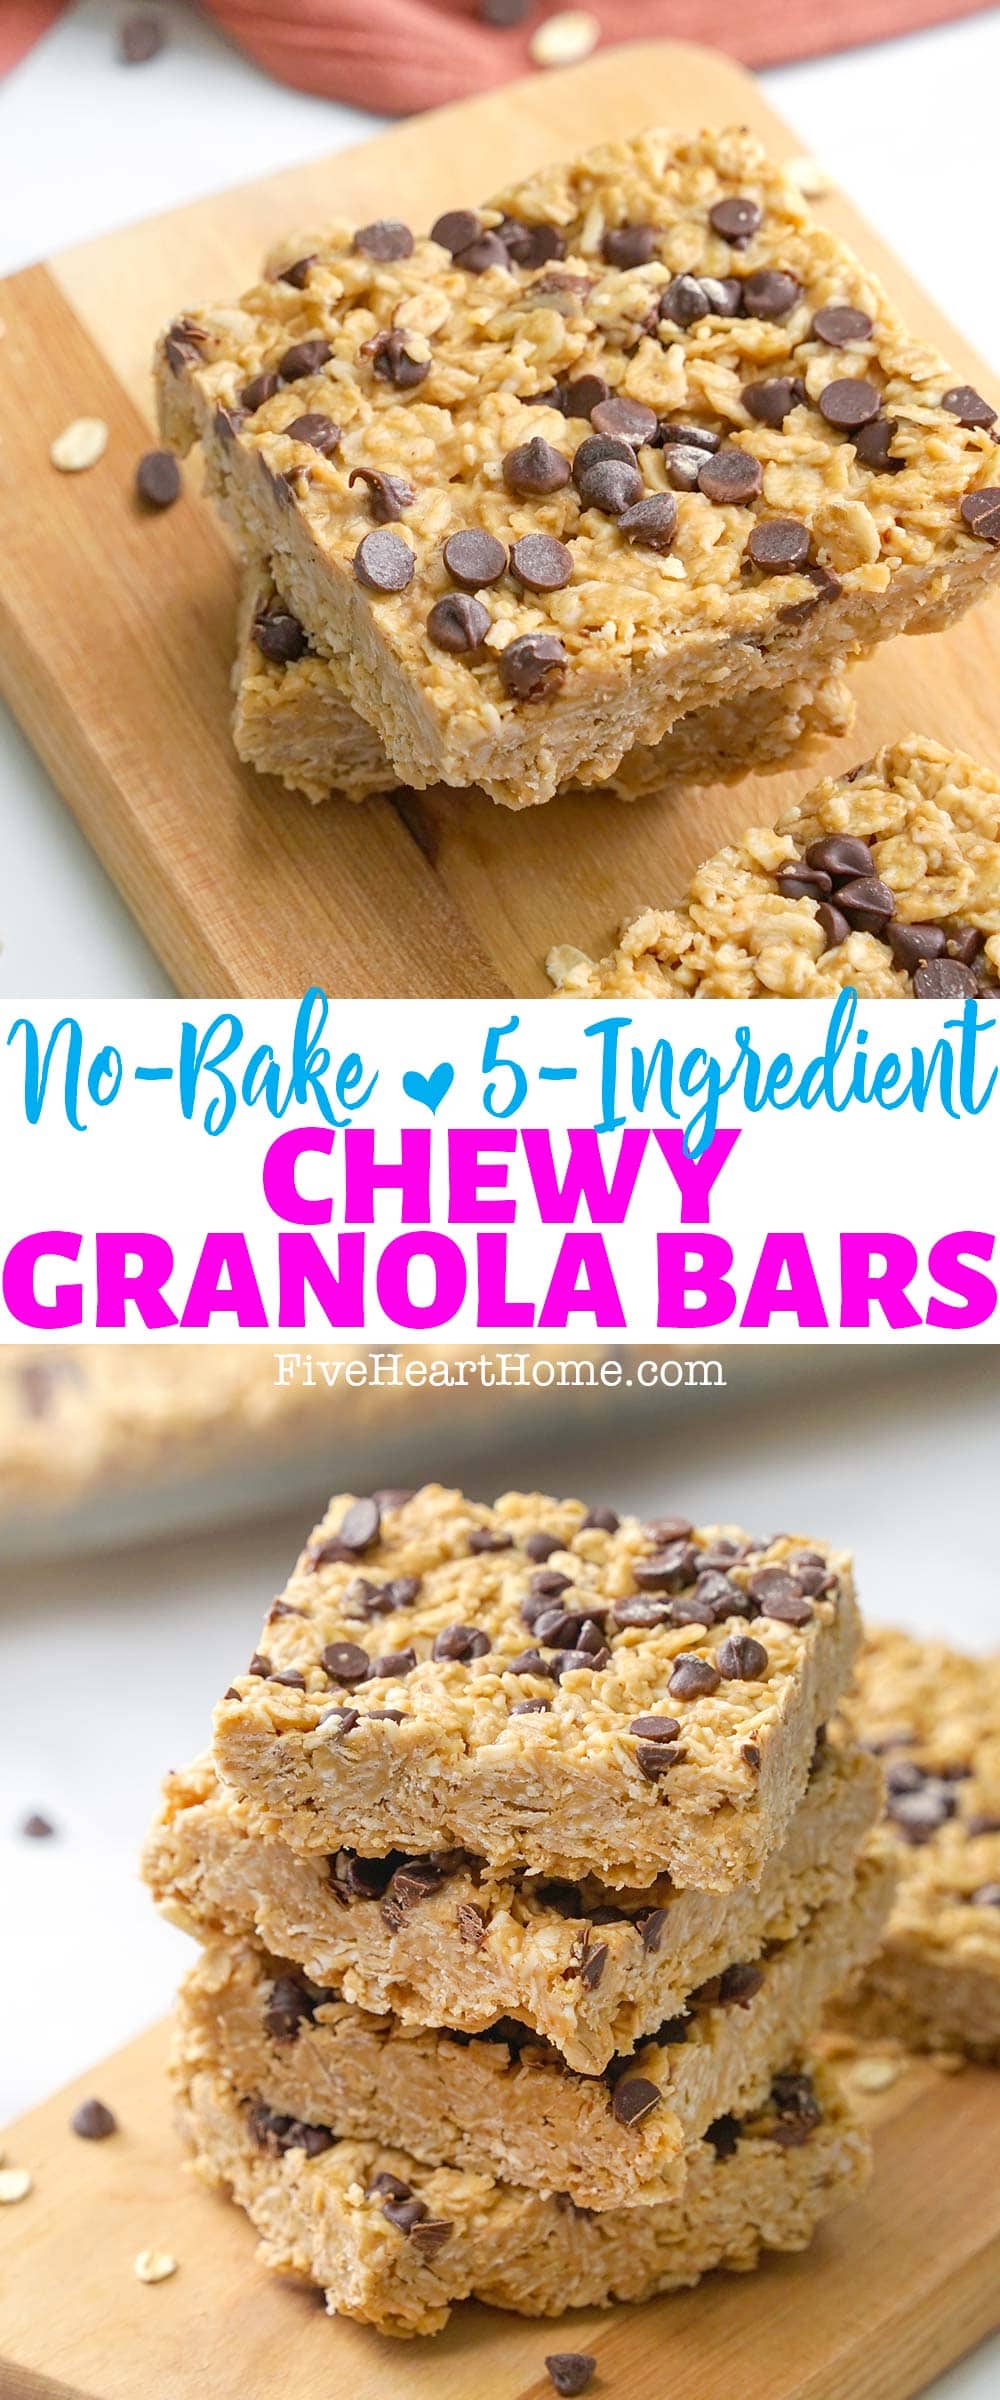 No-Bake Chewy Granola Bars (Just 5 Real Ingredients) • FIVEheartHOME